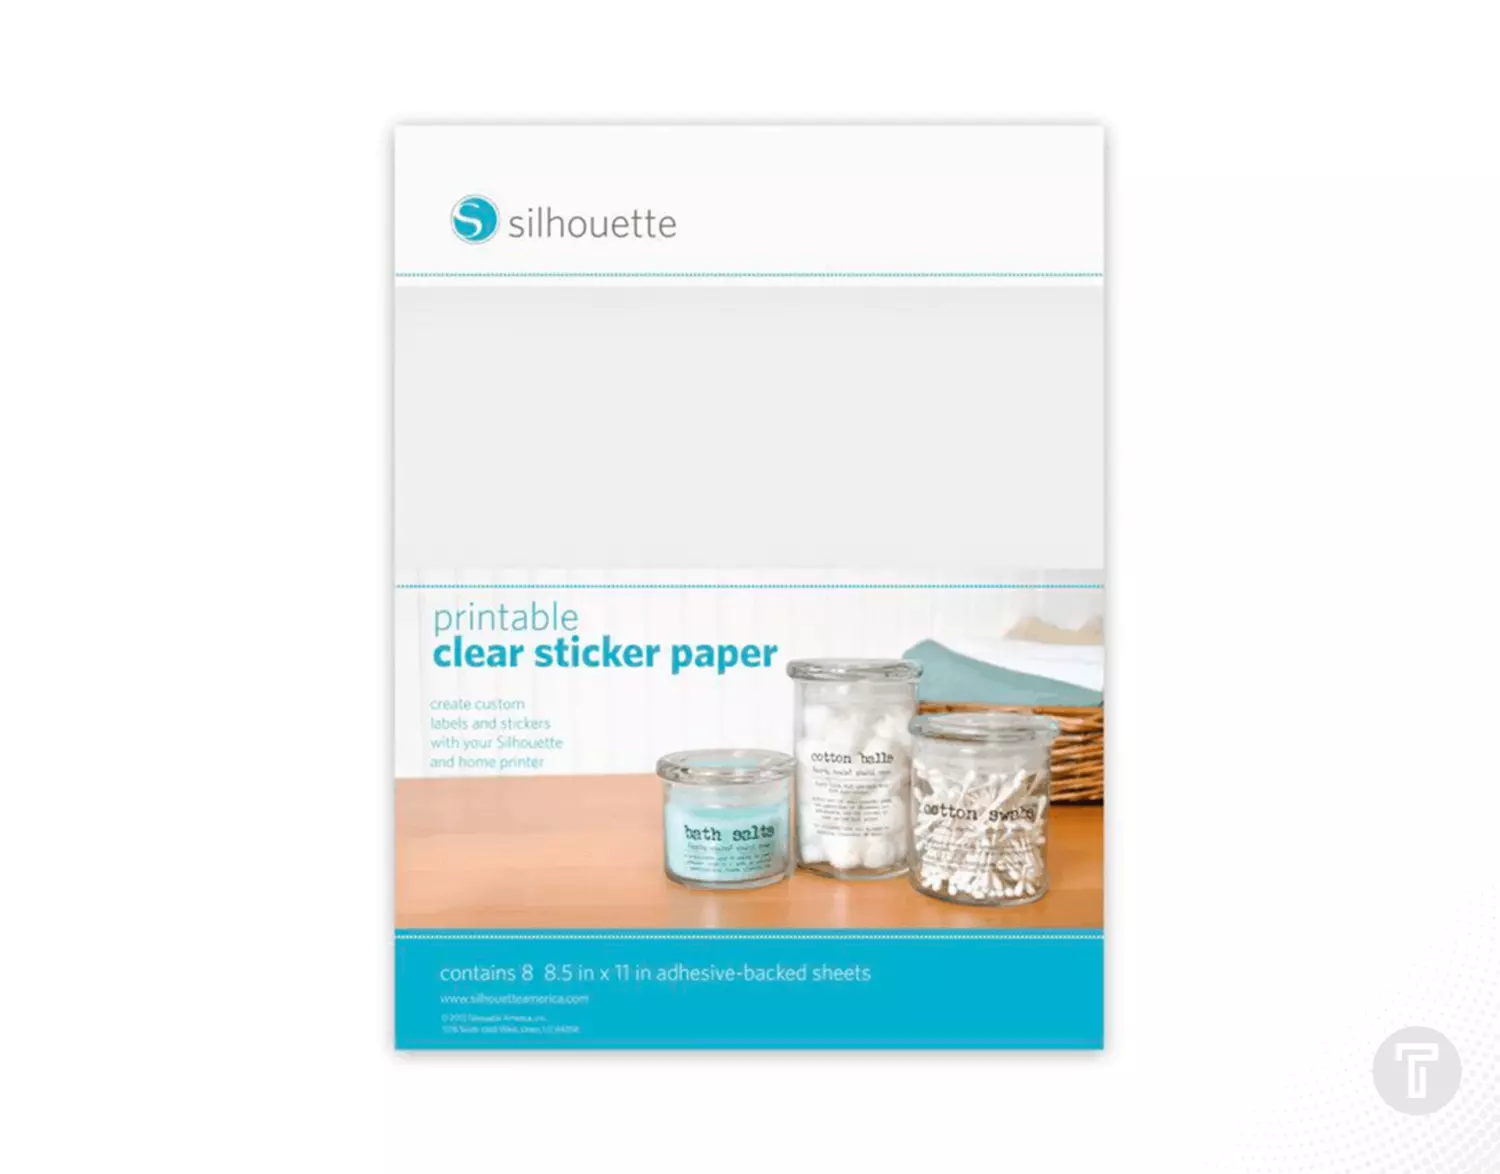 Silhouette printable clear sticker paper